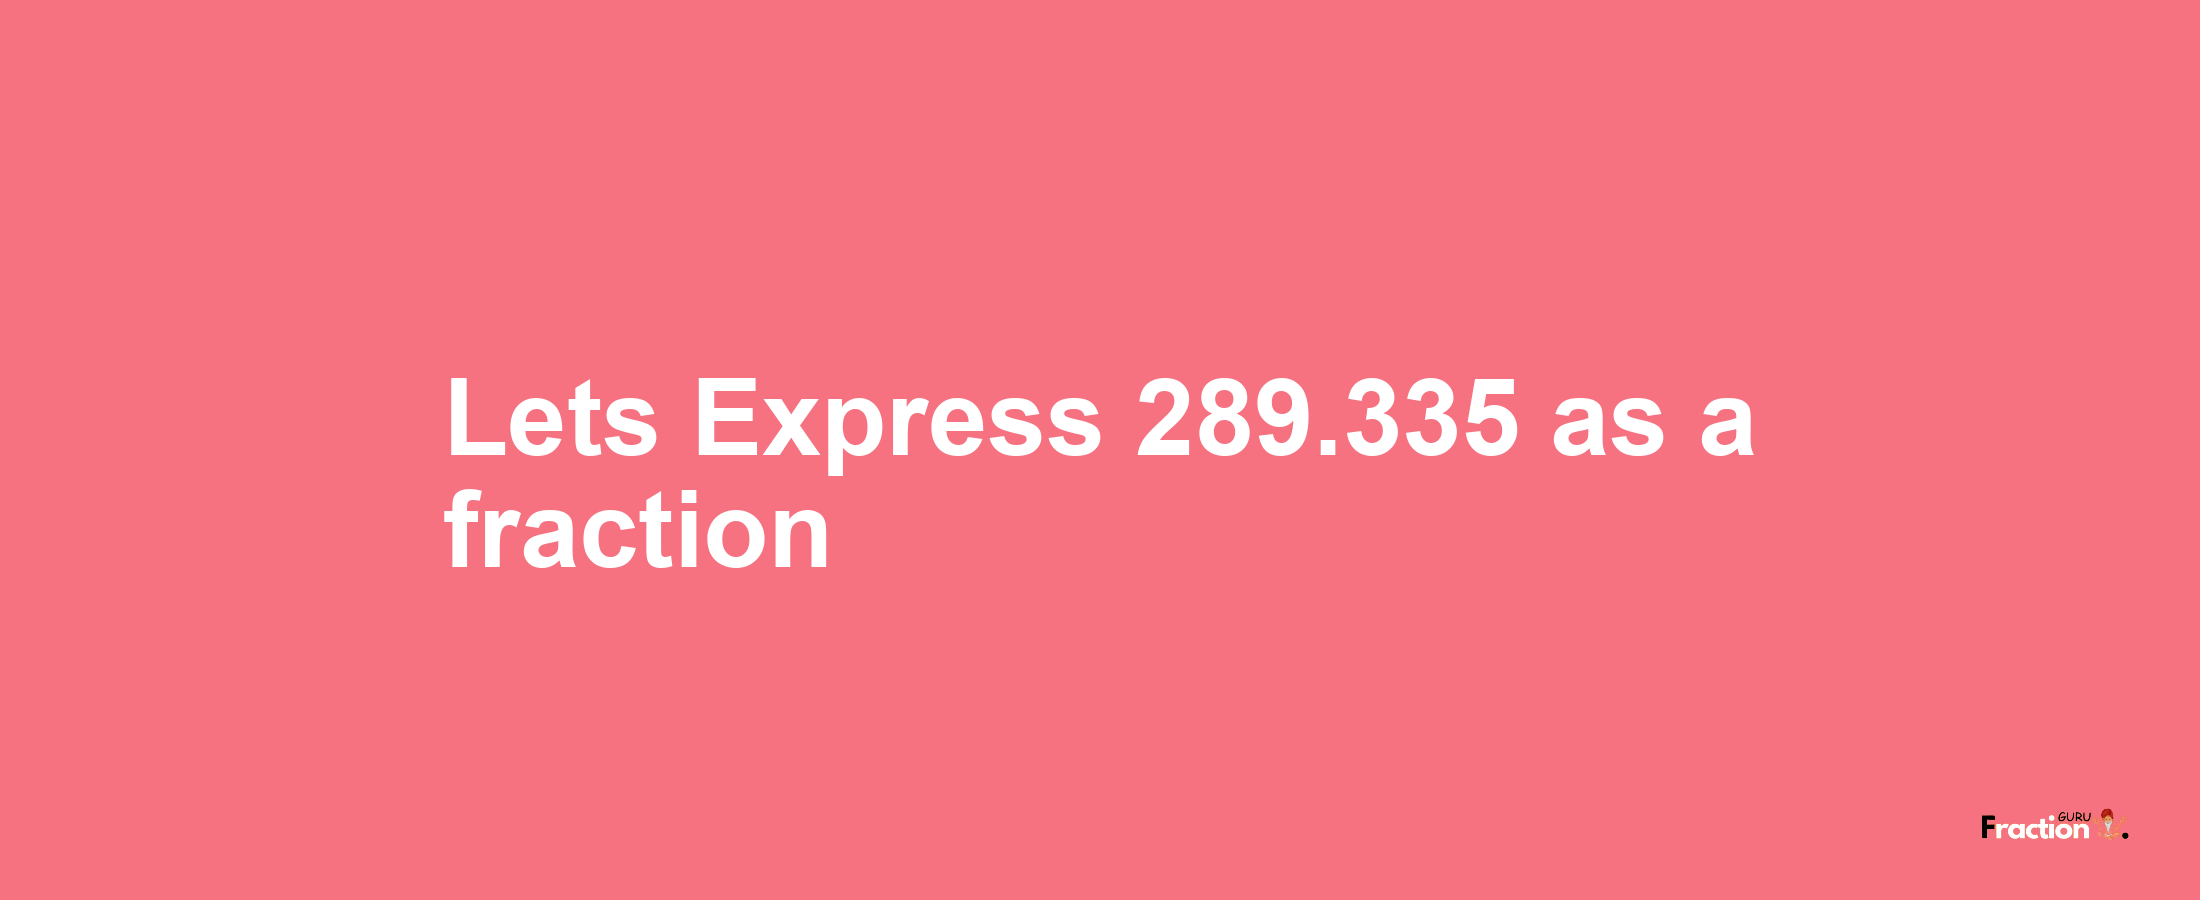 Lets Express 289.335 as afraction